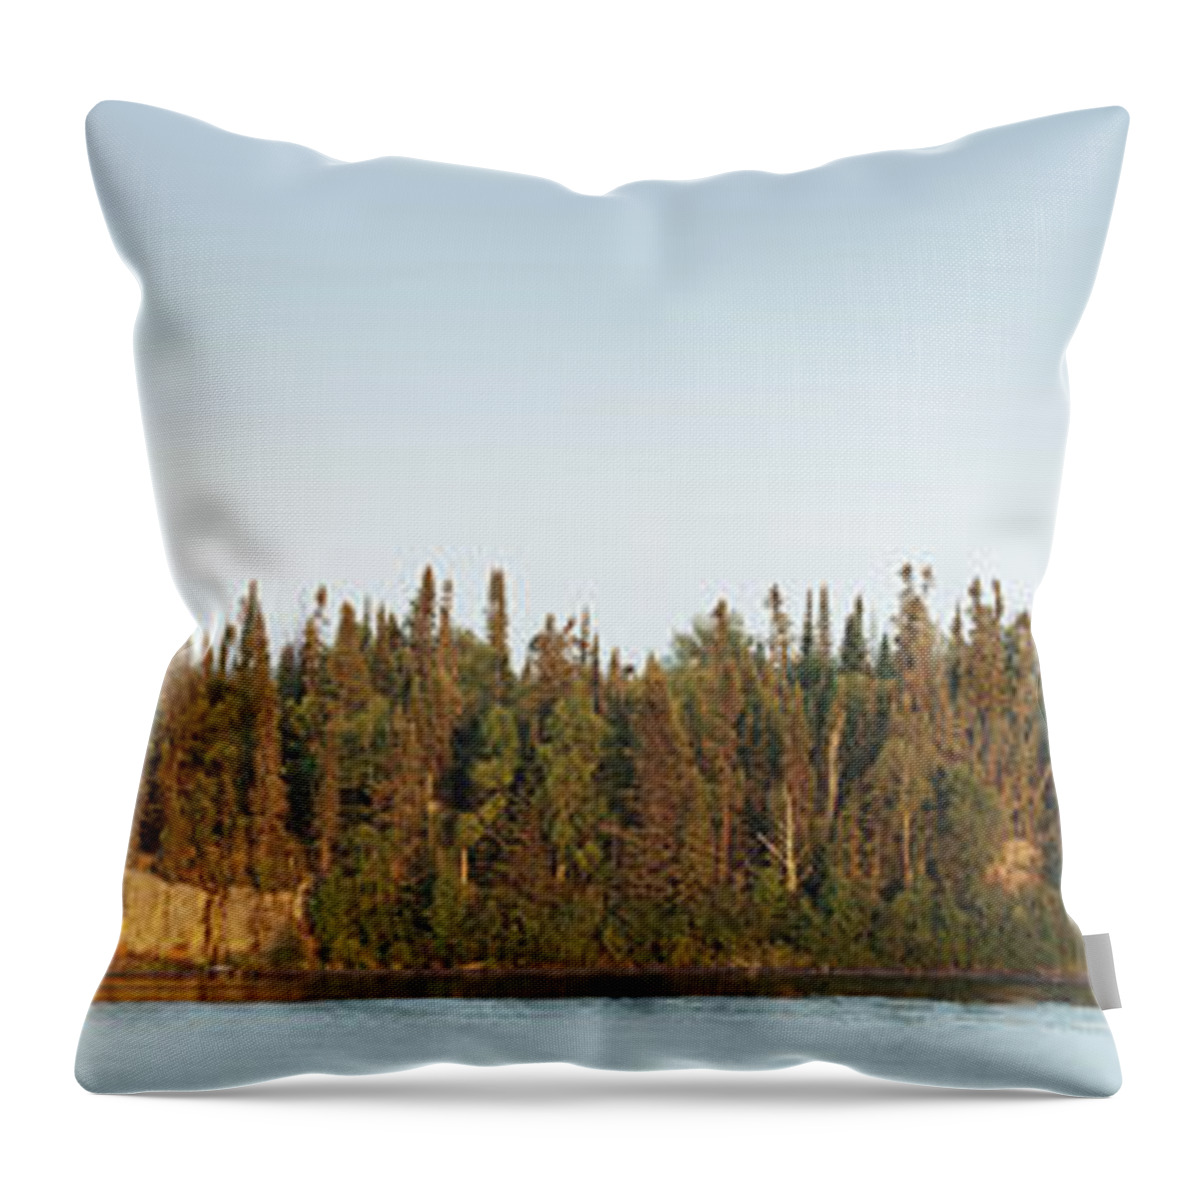 Tree Throw Pillow featuring the photograph Trees Covering An Island On Lake by Susan Dykstra